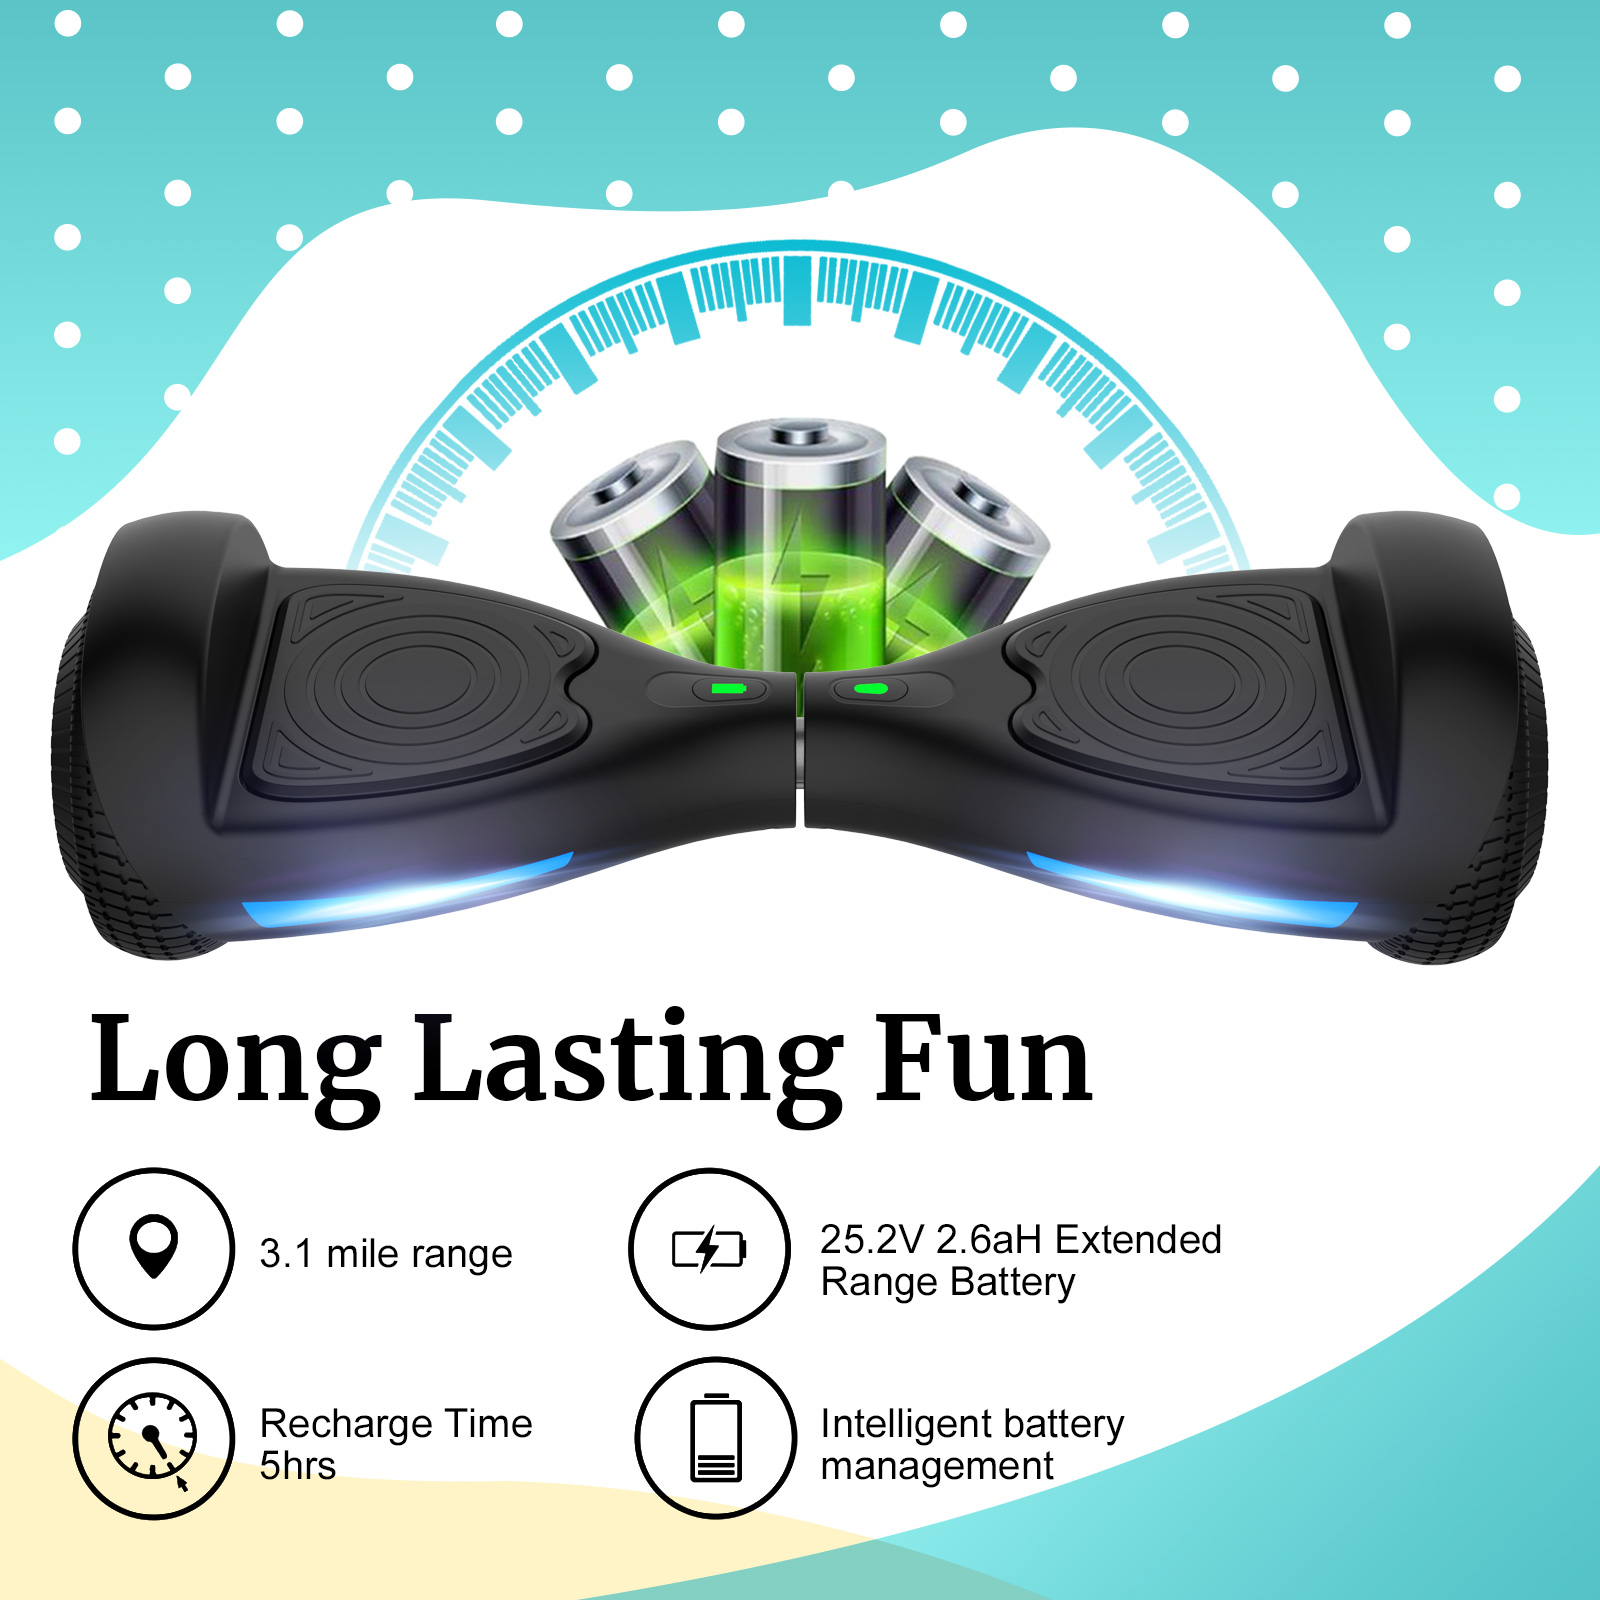 GOTRAX FX3 Hoverboard with 6.2 mph Max Speed, Self Balancing Scooter for 44-176lbs Kids Adults Black - image 4 of 9